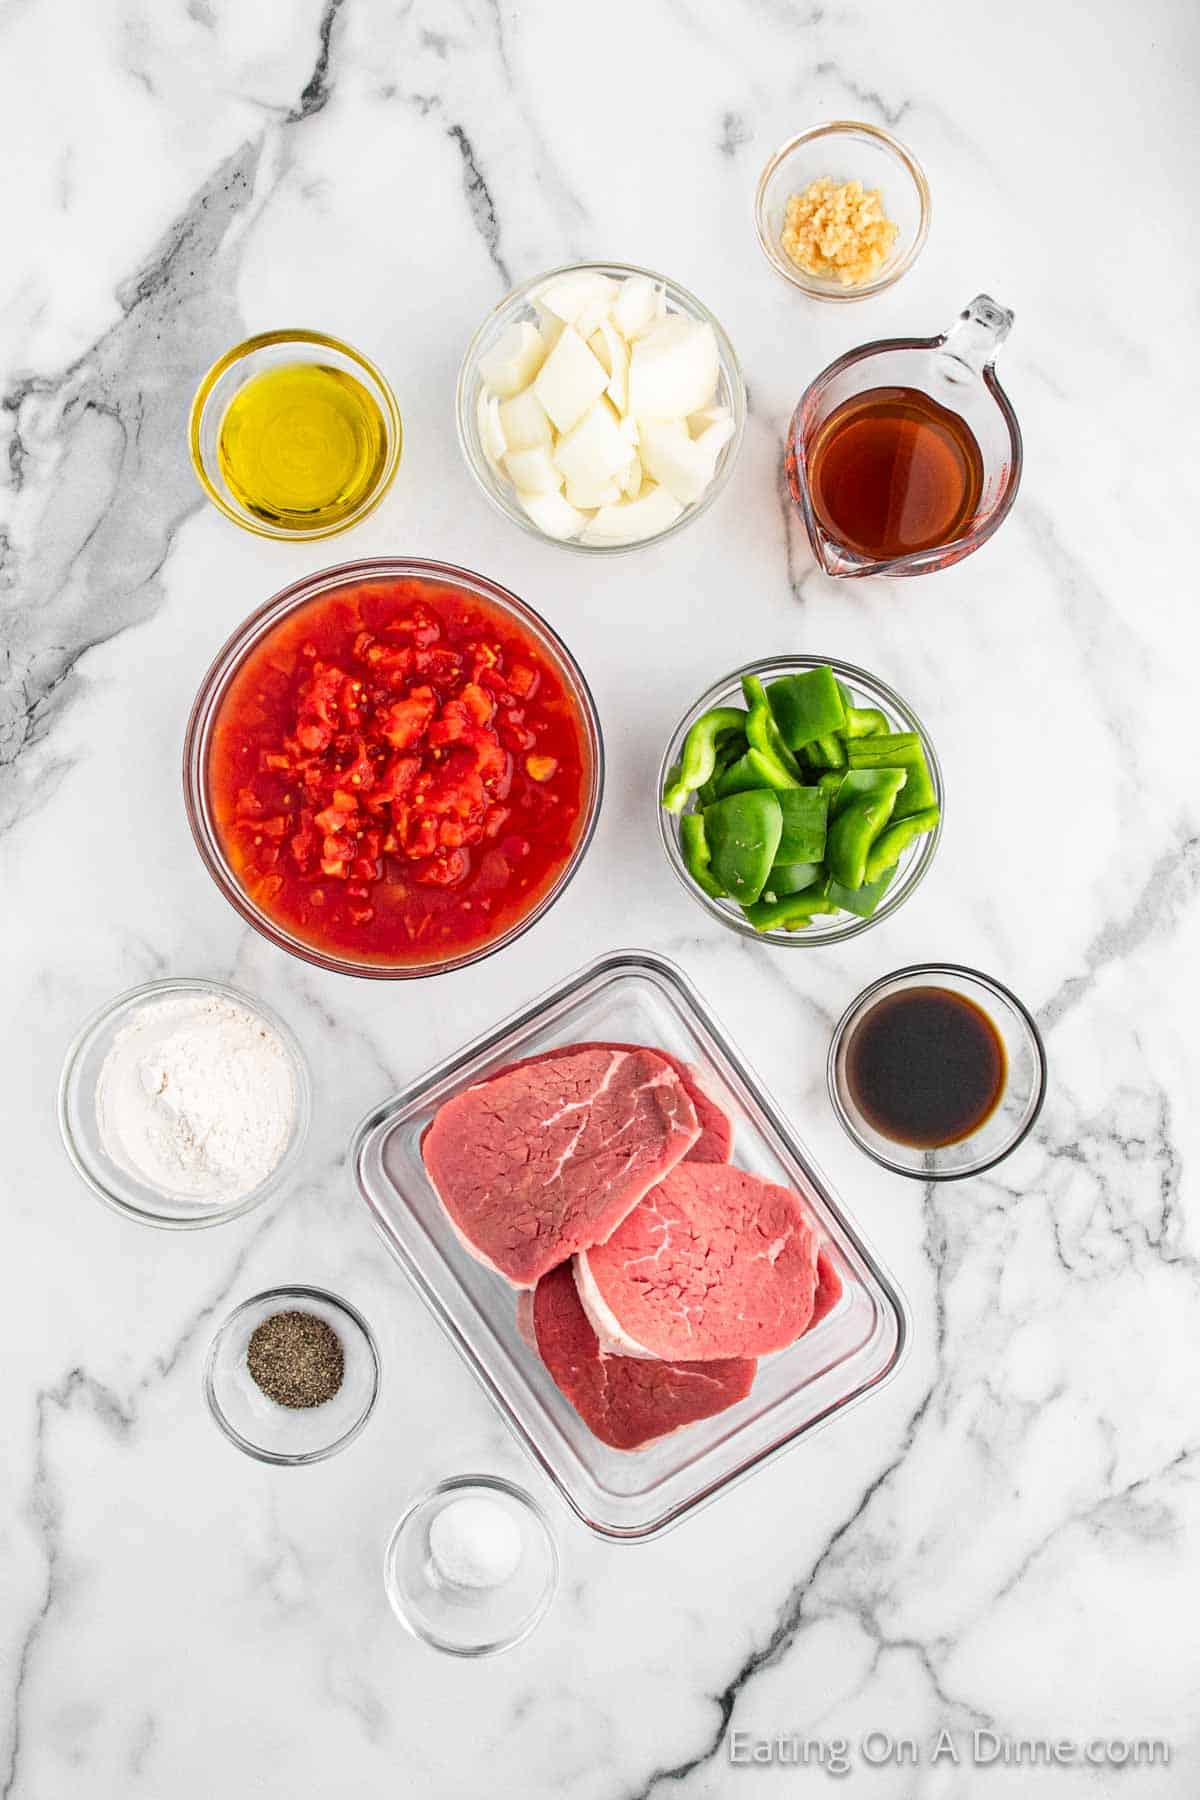 Ingredients - round steaks, flour, salt, pepper, garlic, olive oil, beef broth, diced tomatoes, Worcestershire sauce, onion, bell pepper